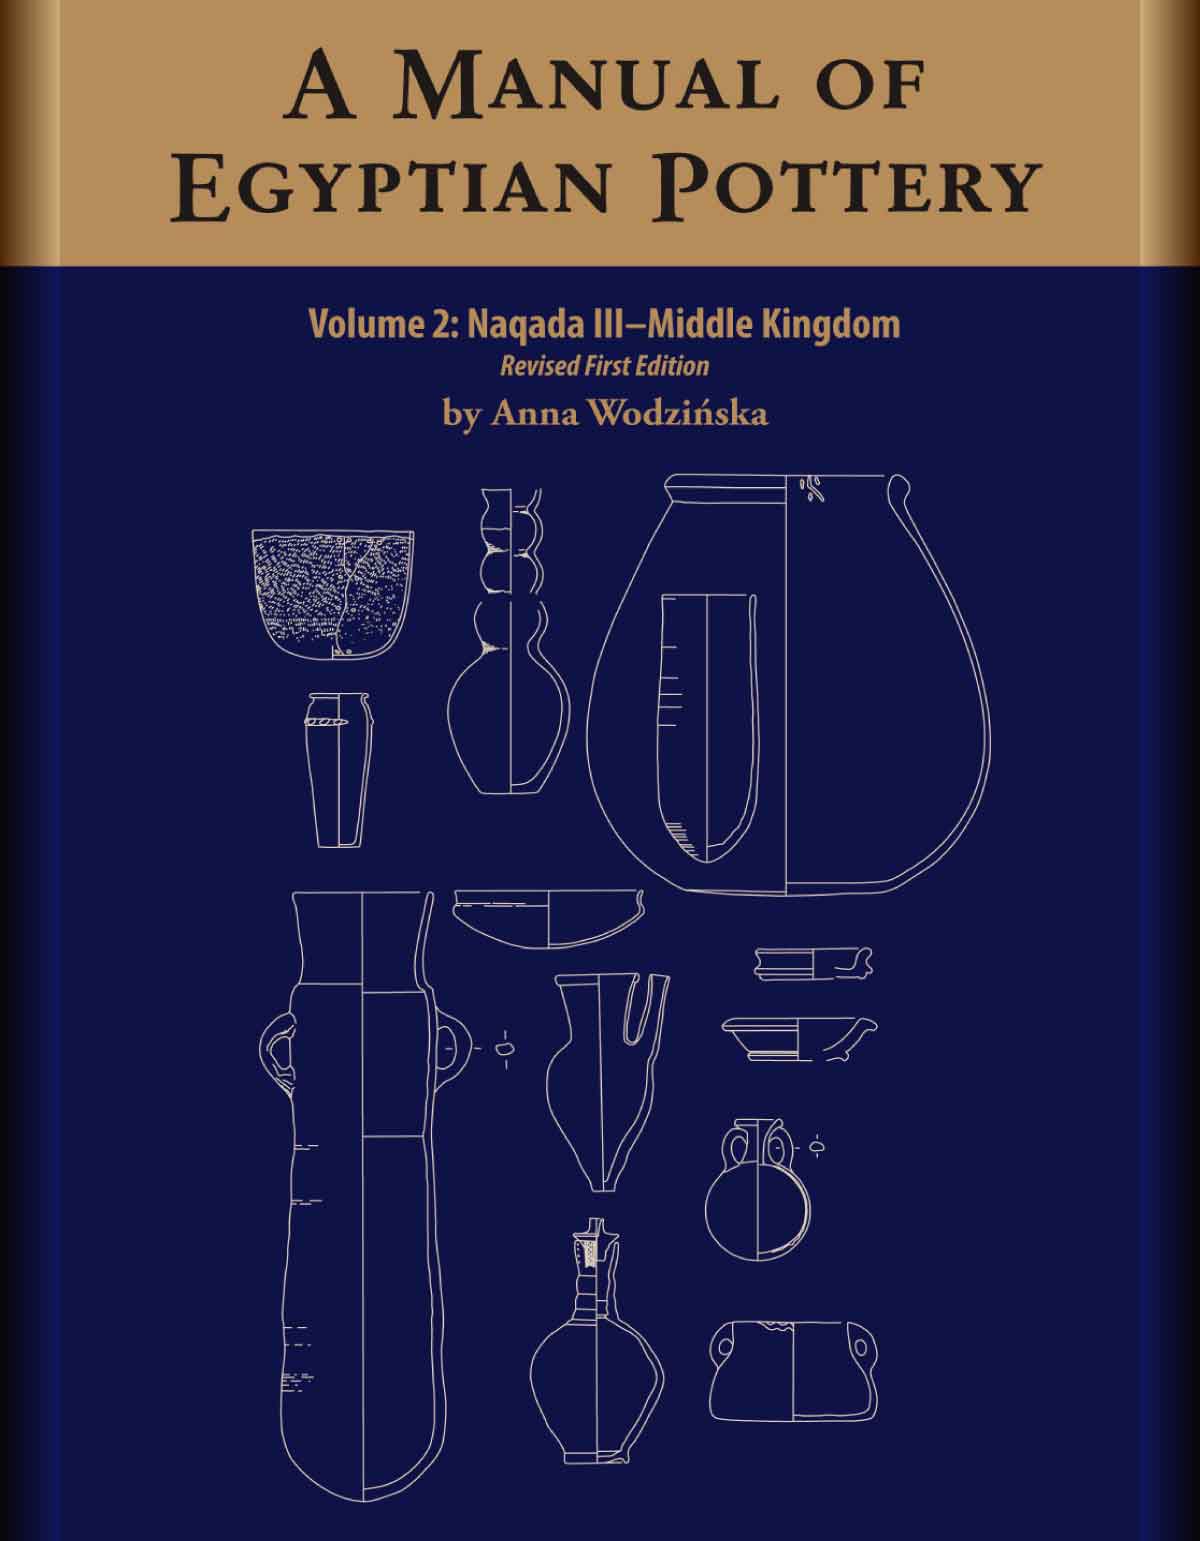 A-Manual-of-Egyptian-Pottery-vol-2-cover